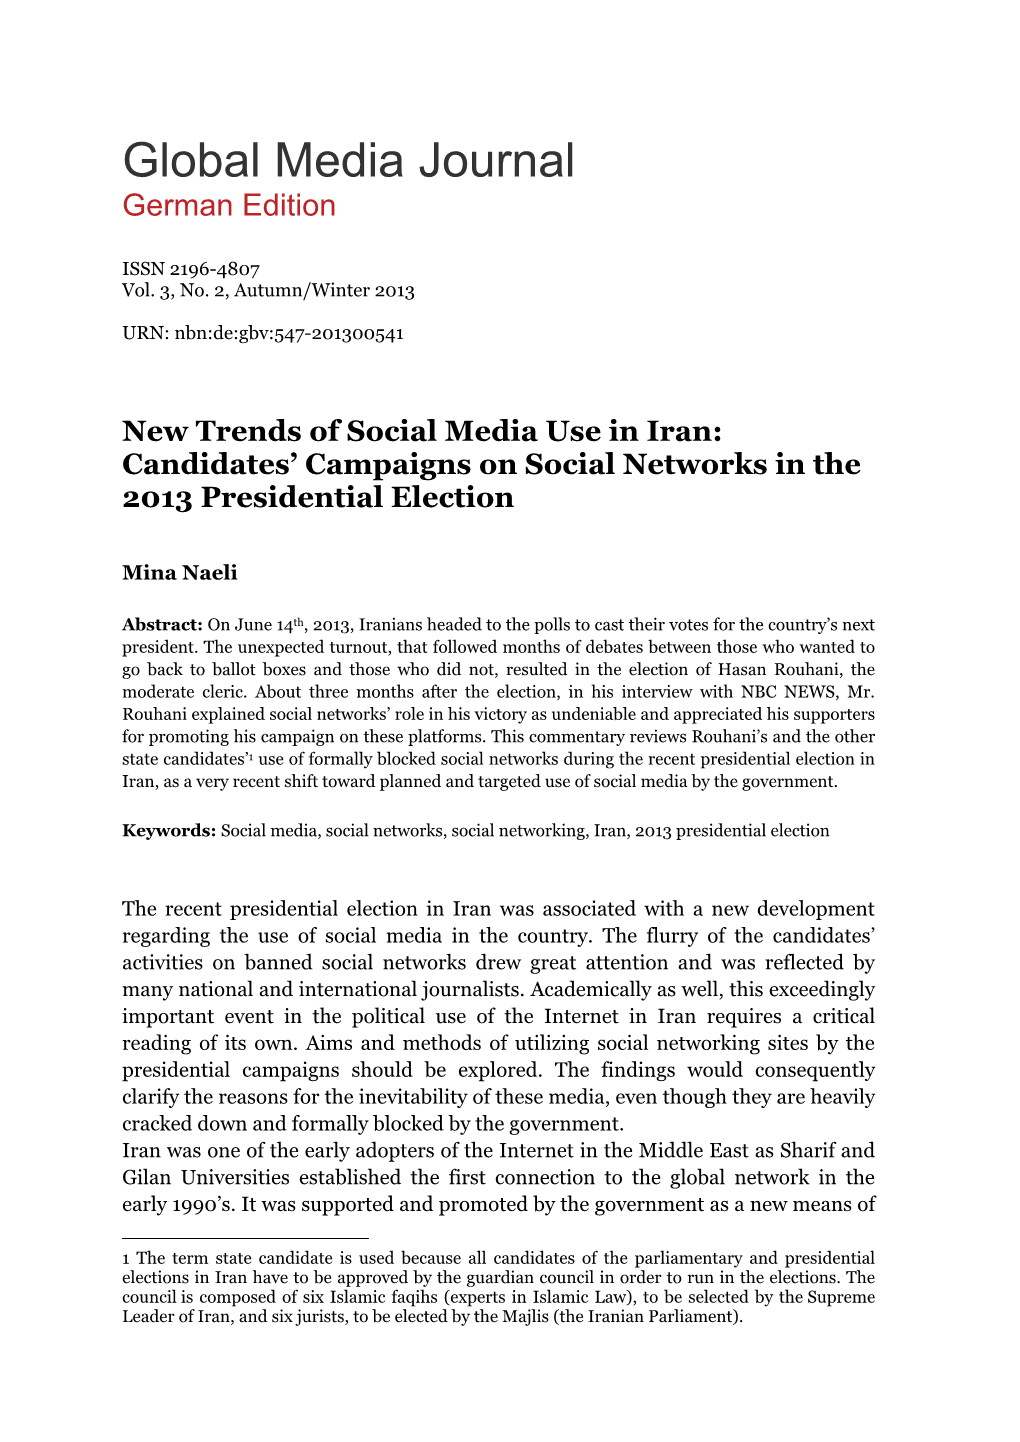 New Trends of Social Media Use in Iran: Candidates’ Campaigns on Social Networks in the 2013 Presidential Election